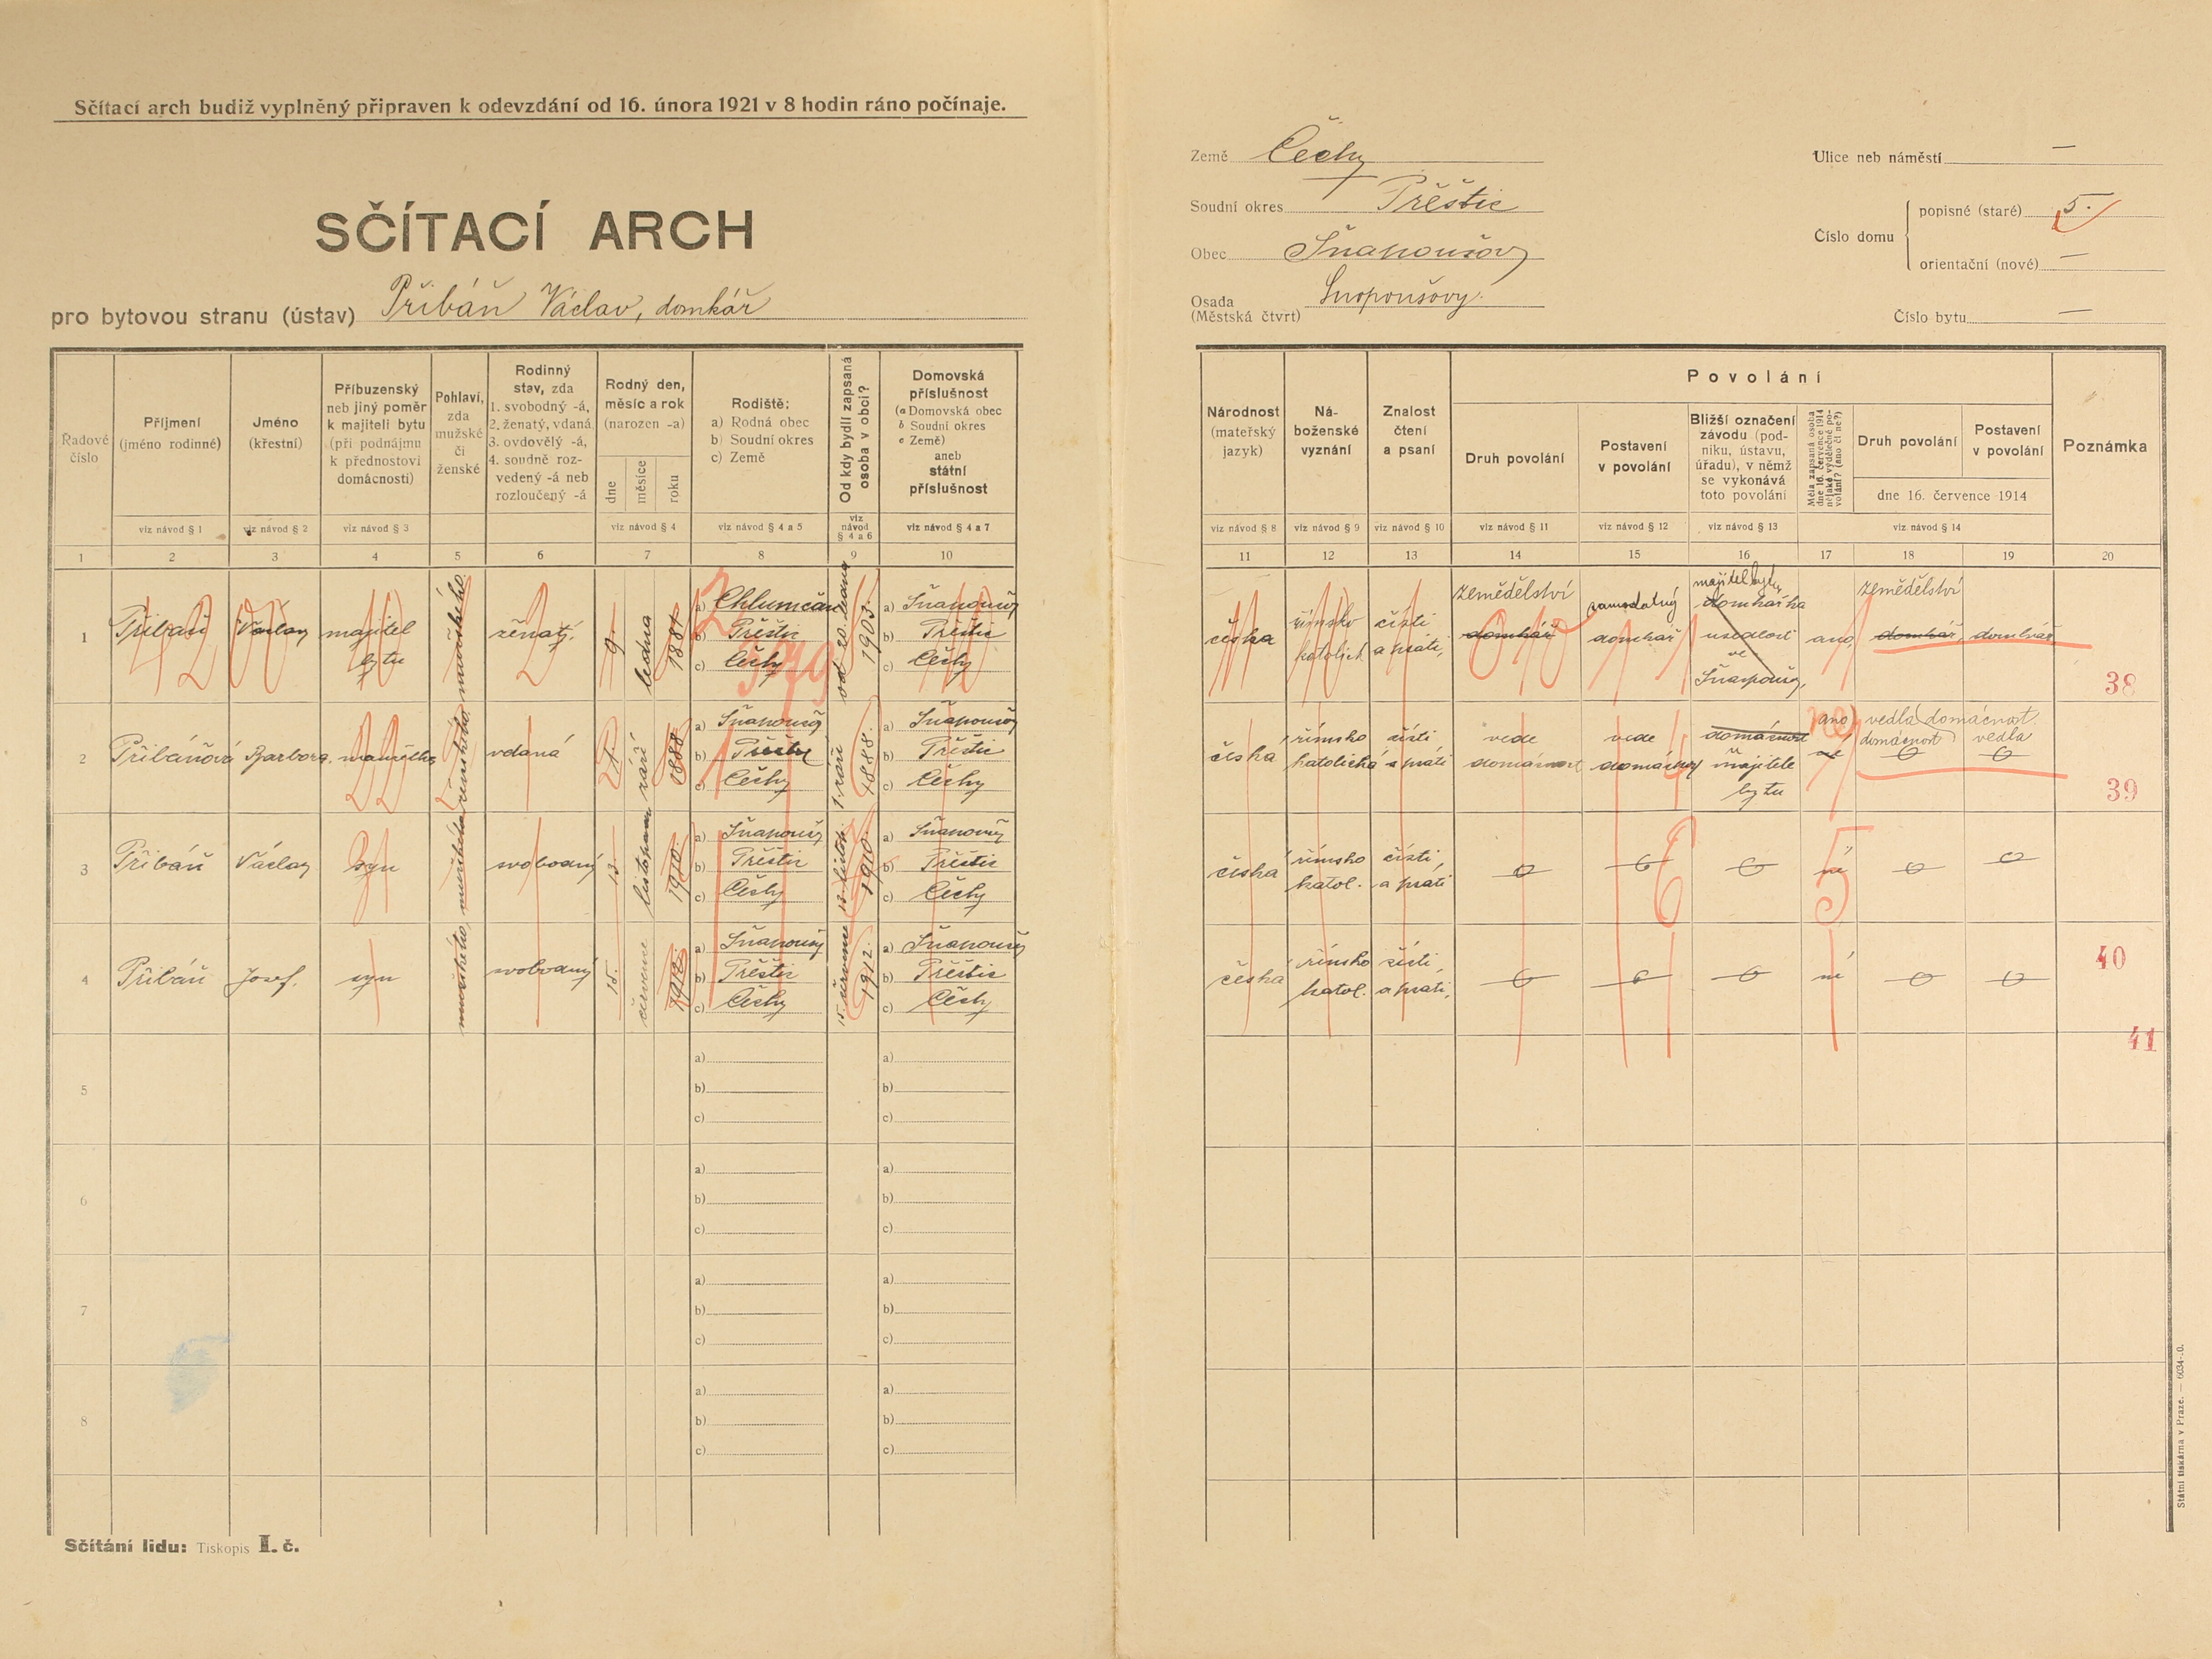 2. soap-pj_00302_census-1921-snopousovy-cp005_0020